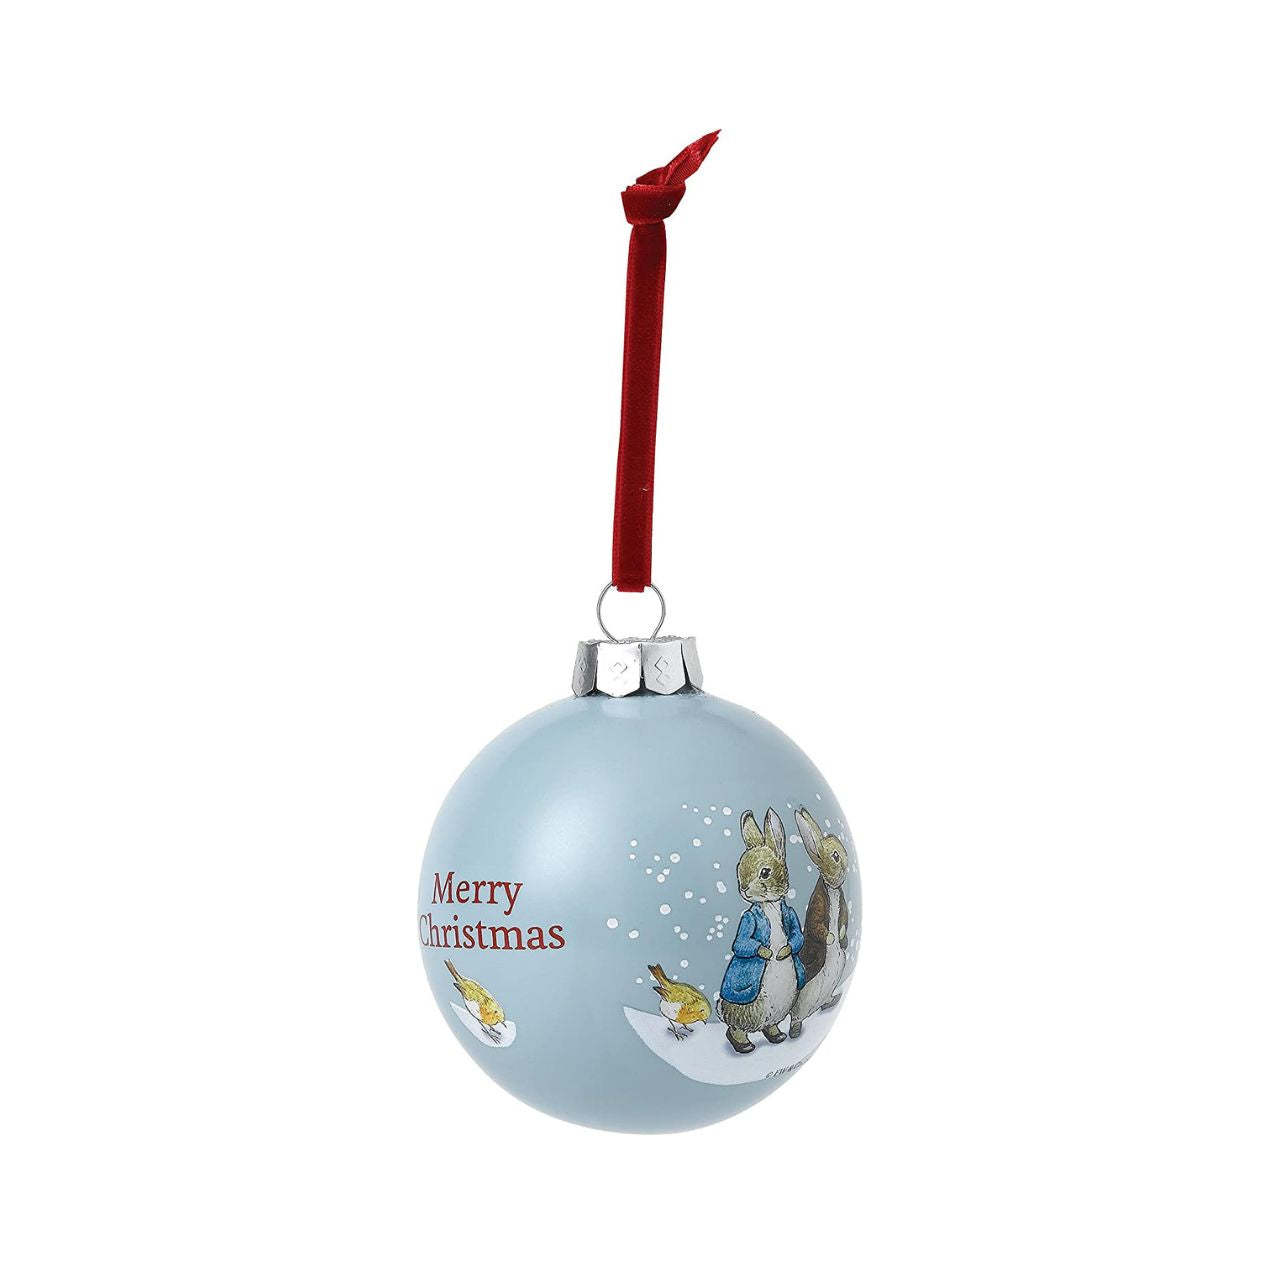 Beatrix Potter Peter & Benjamin's Snowball Fight Christmas Bauble  Wish someone a very Merry Christmas with this Peter and Benjamin's Snowball Fight Bauble. This bauble would make a treasured keepsake over the festive period, and would be take pride of place on the Christmas tree.